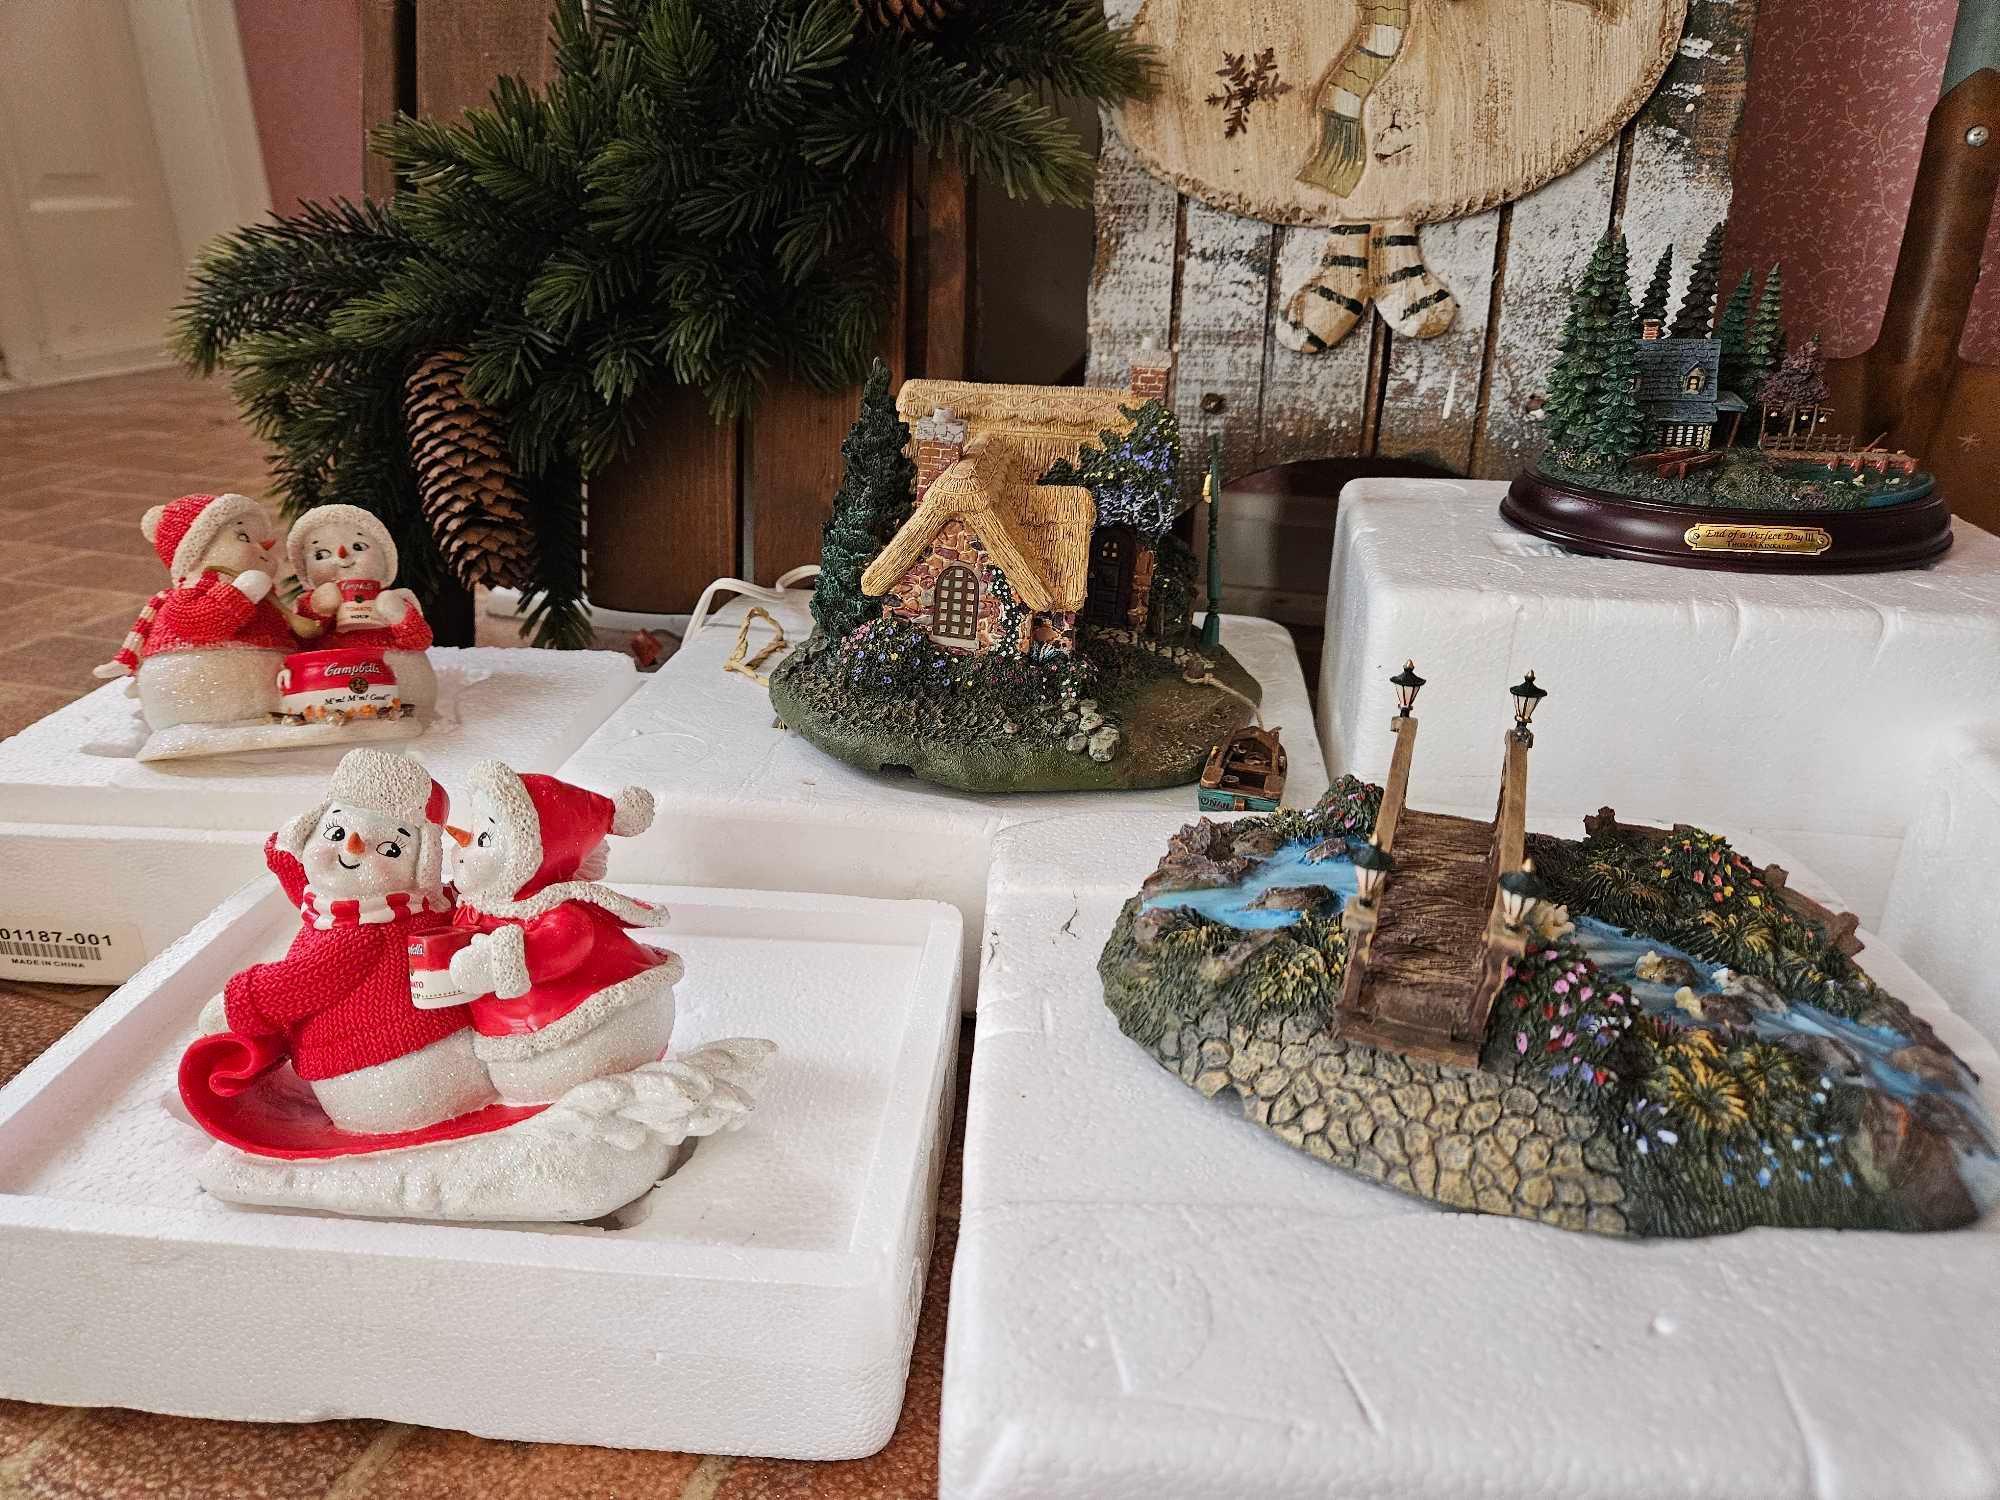 Assortment of Christmas Items and Village